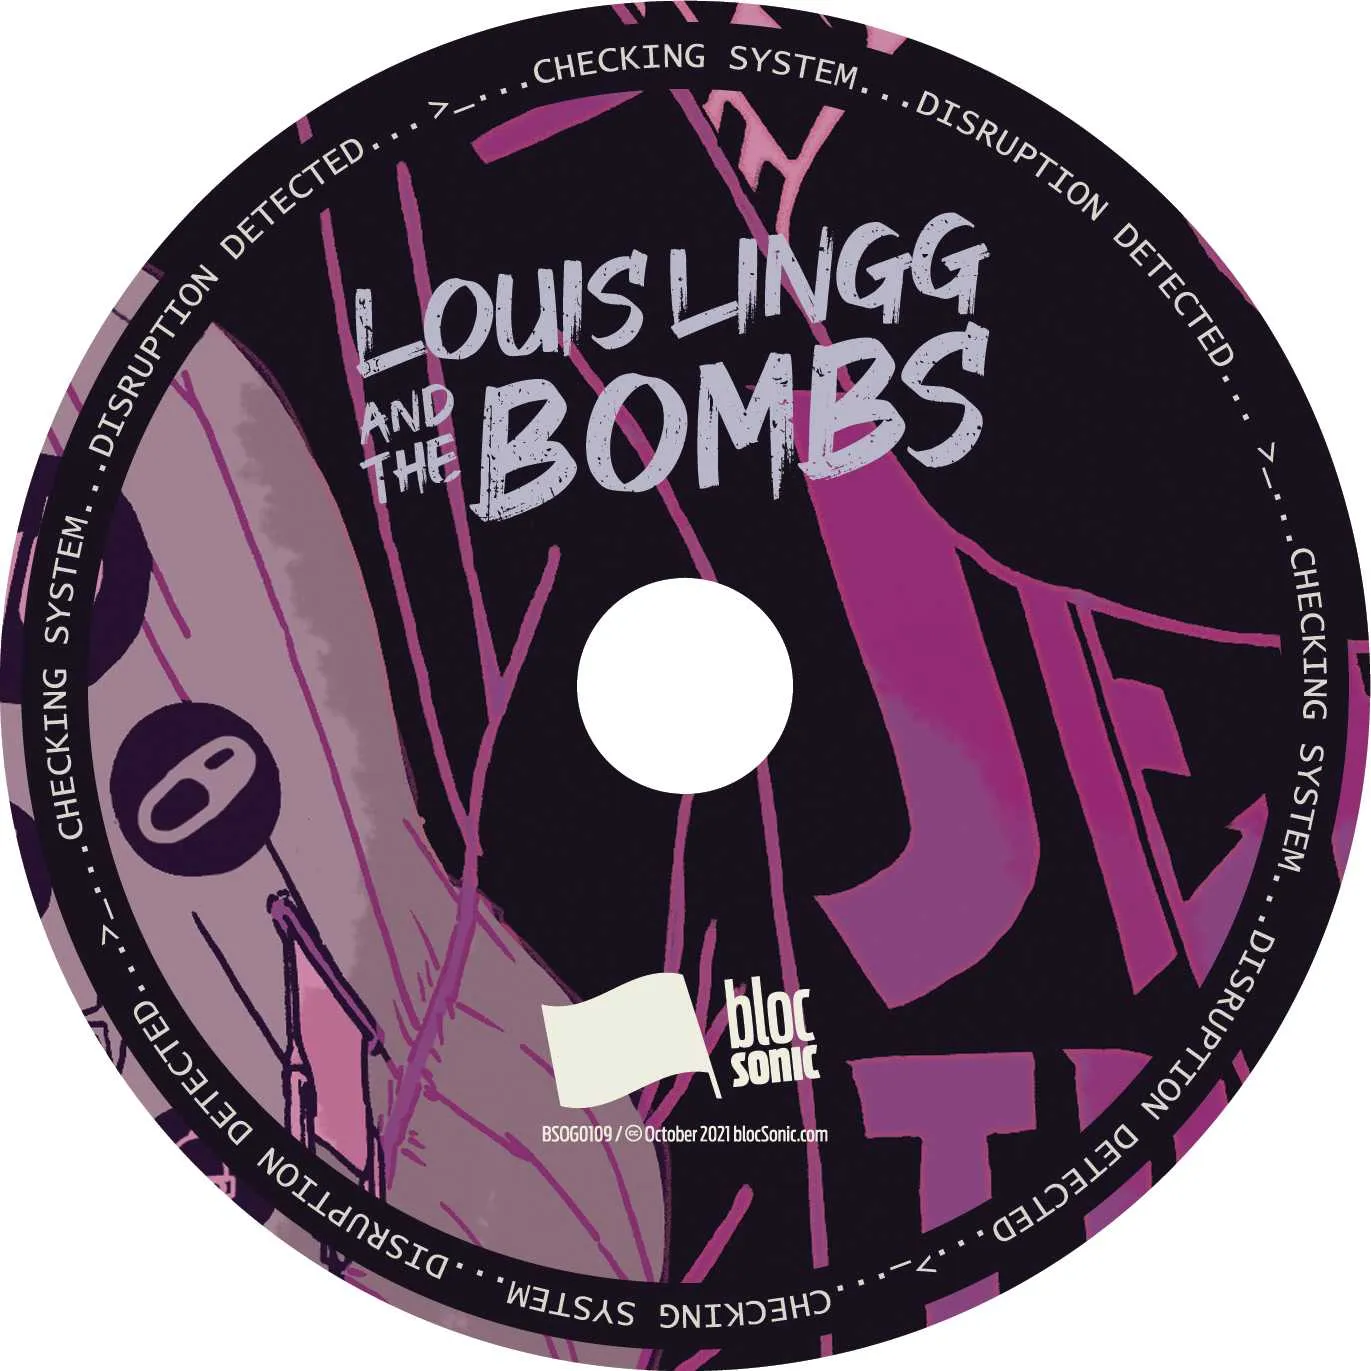 Album disc for “&gt;...checking system... disruption detected...” by Louis Lingg and The Bombs